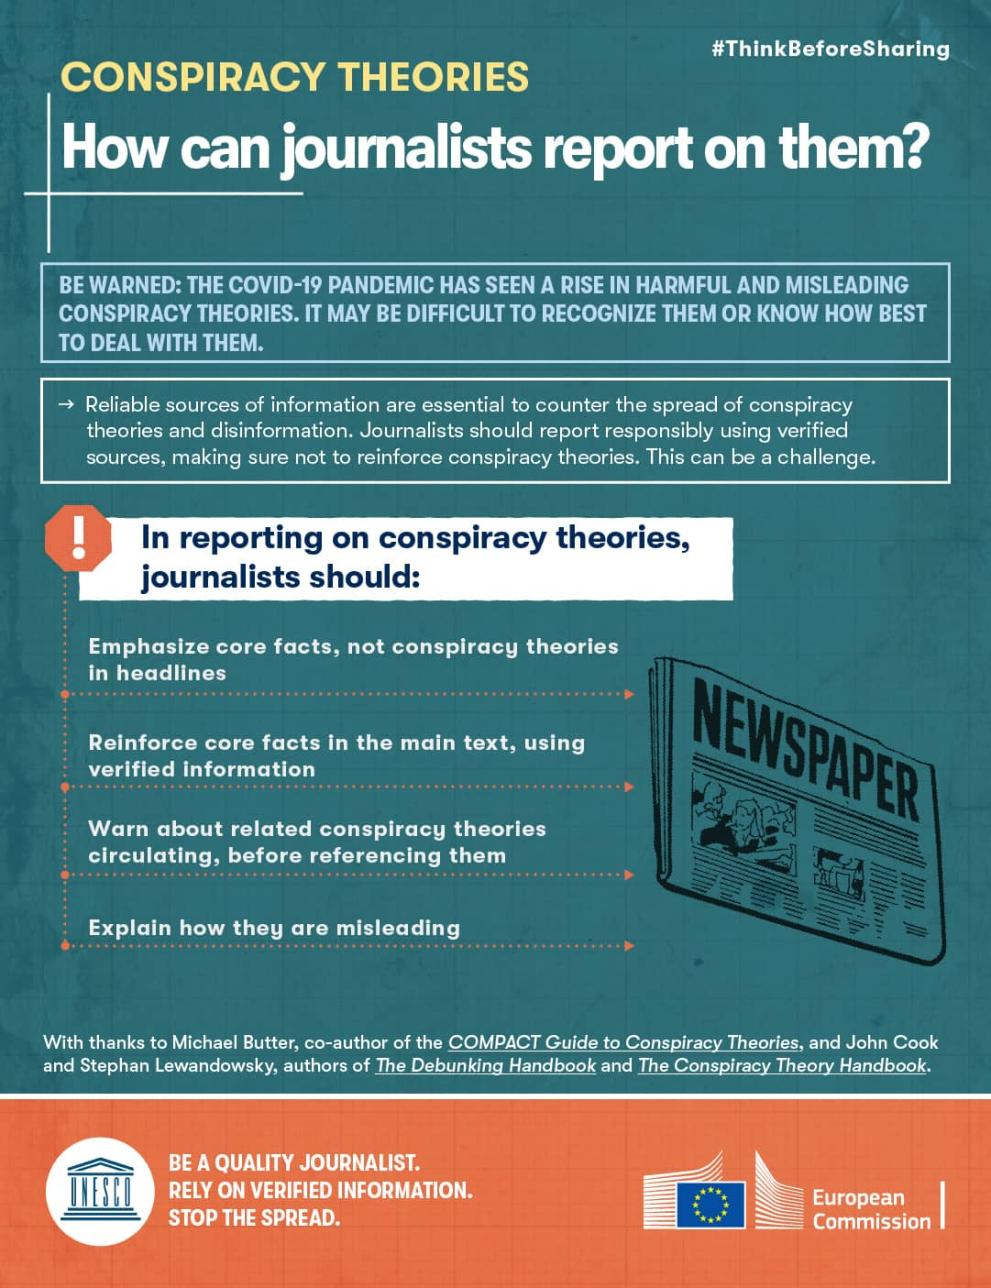 How can journalists report on them?